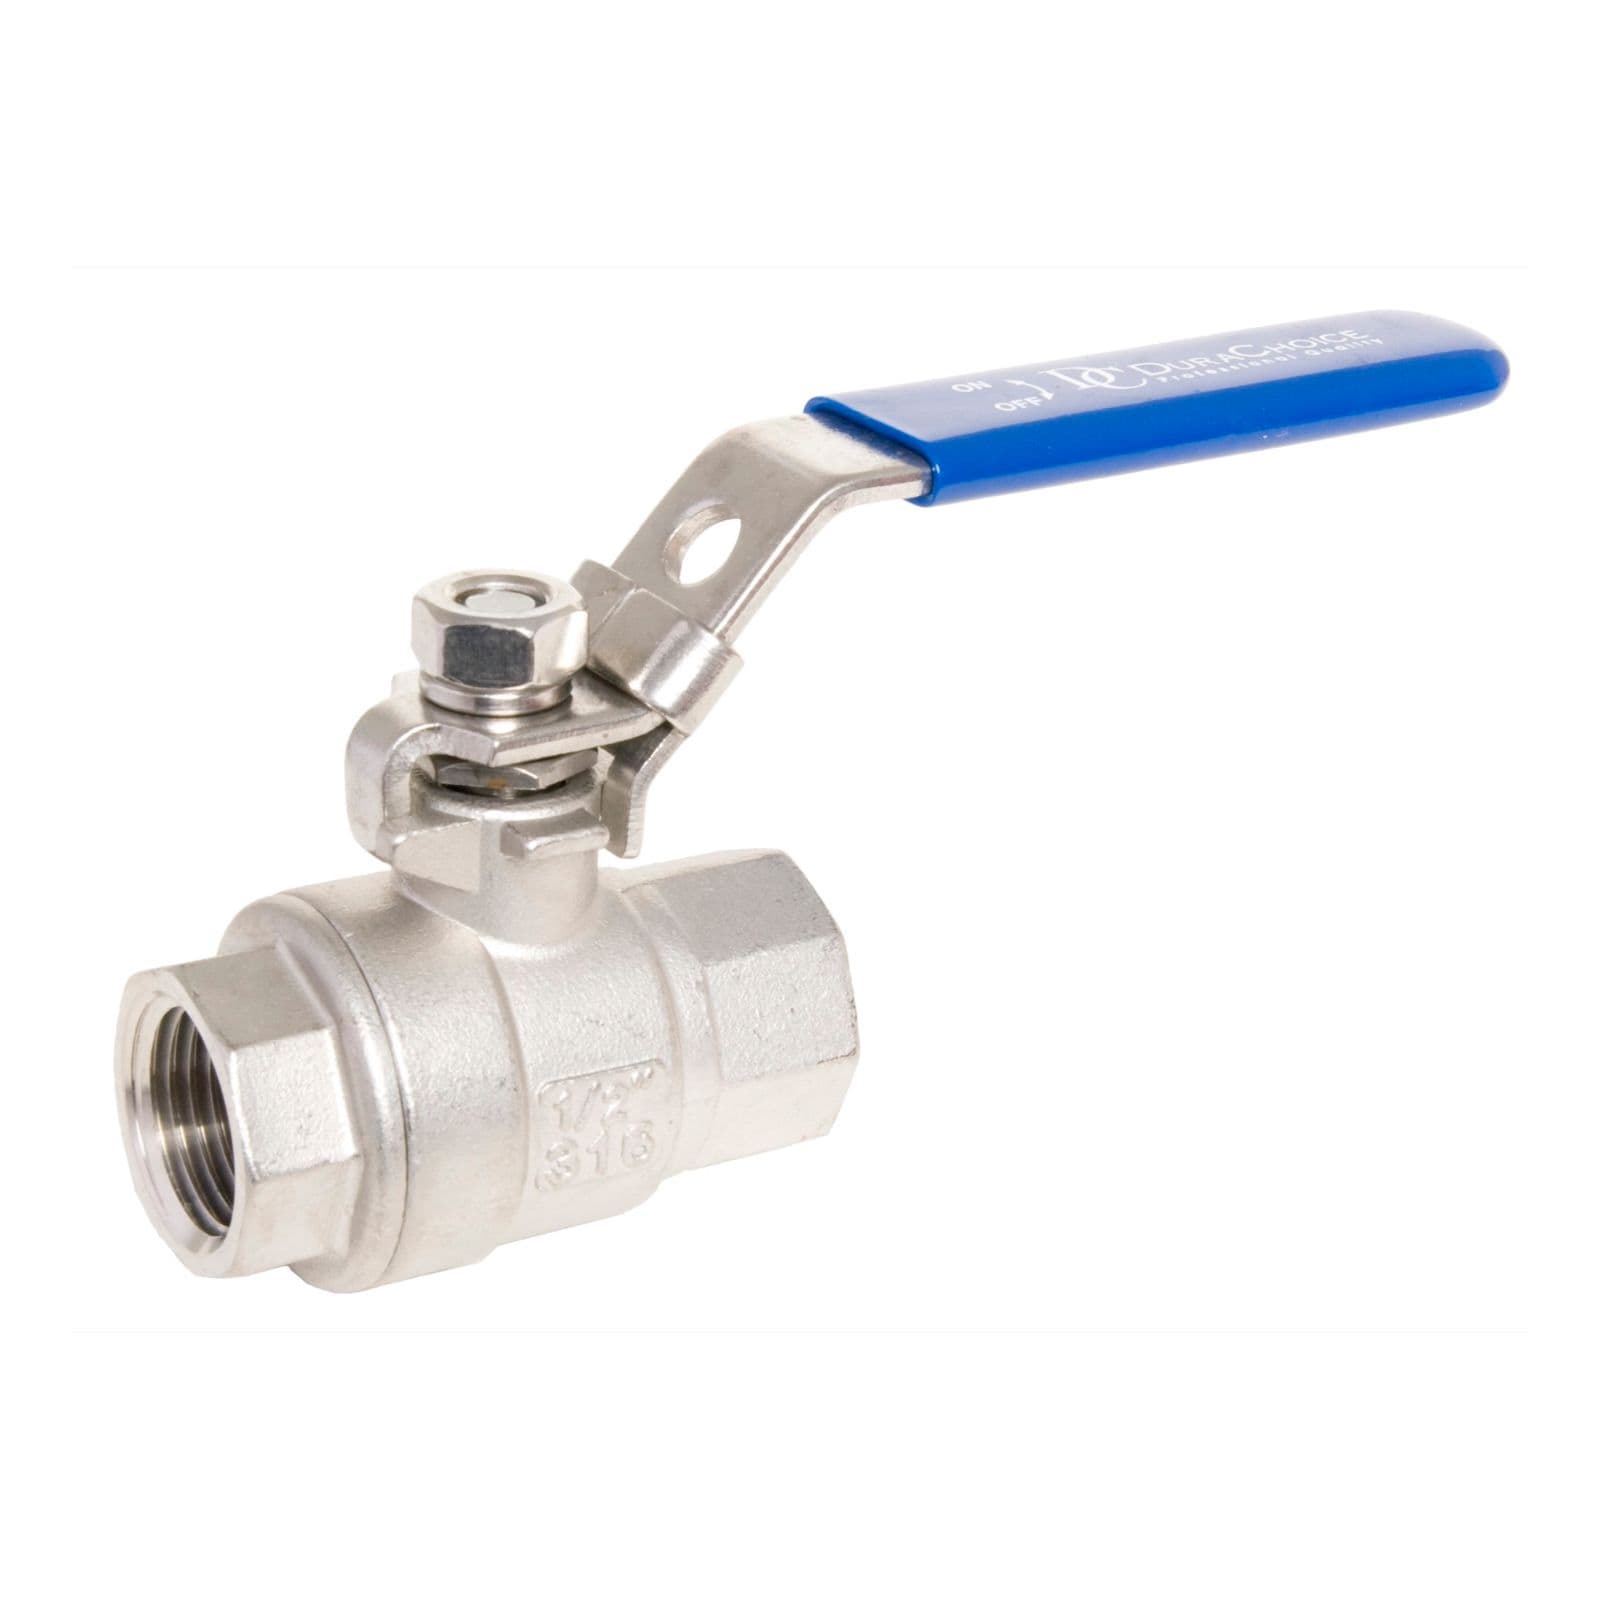 1/2" Check Valve BSPT WOG 1000 Spring Loaded In-line Stainless Steel SS316 CF8M 